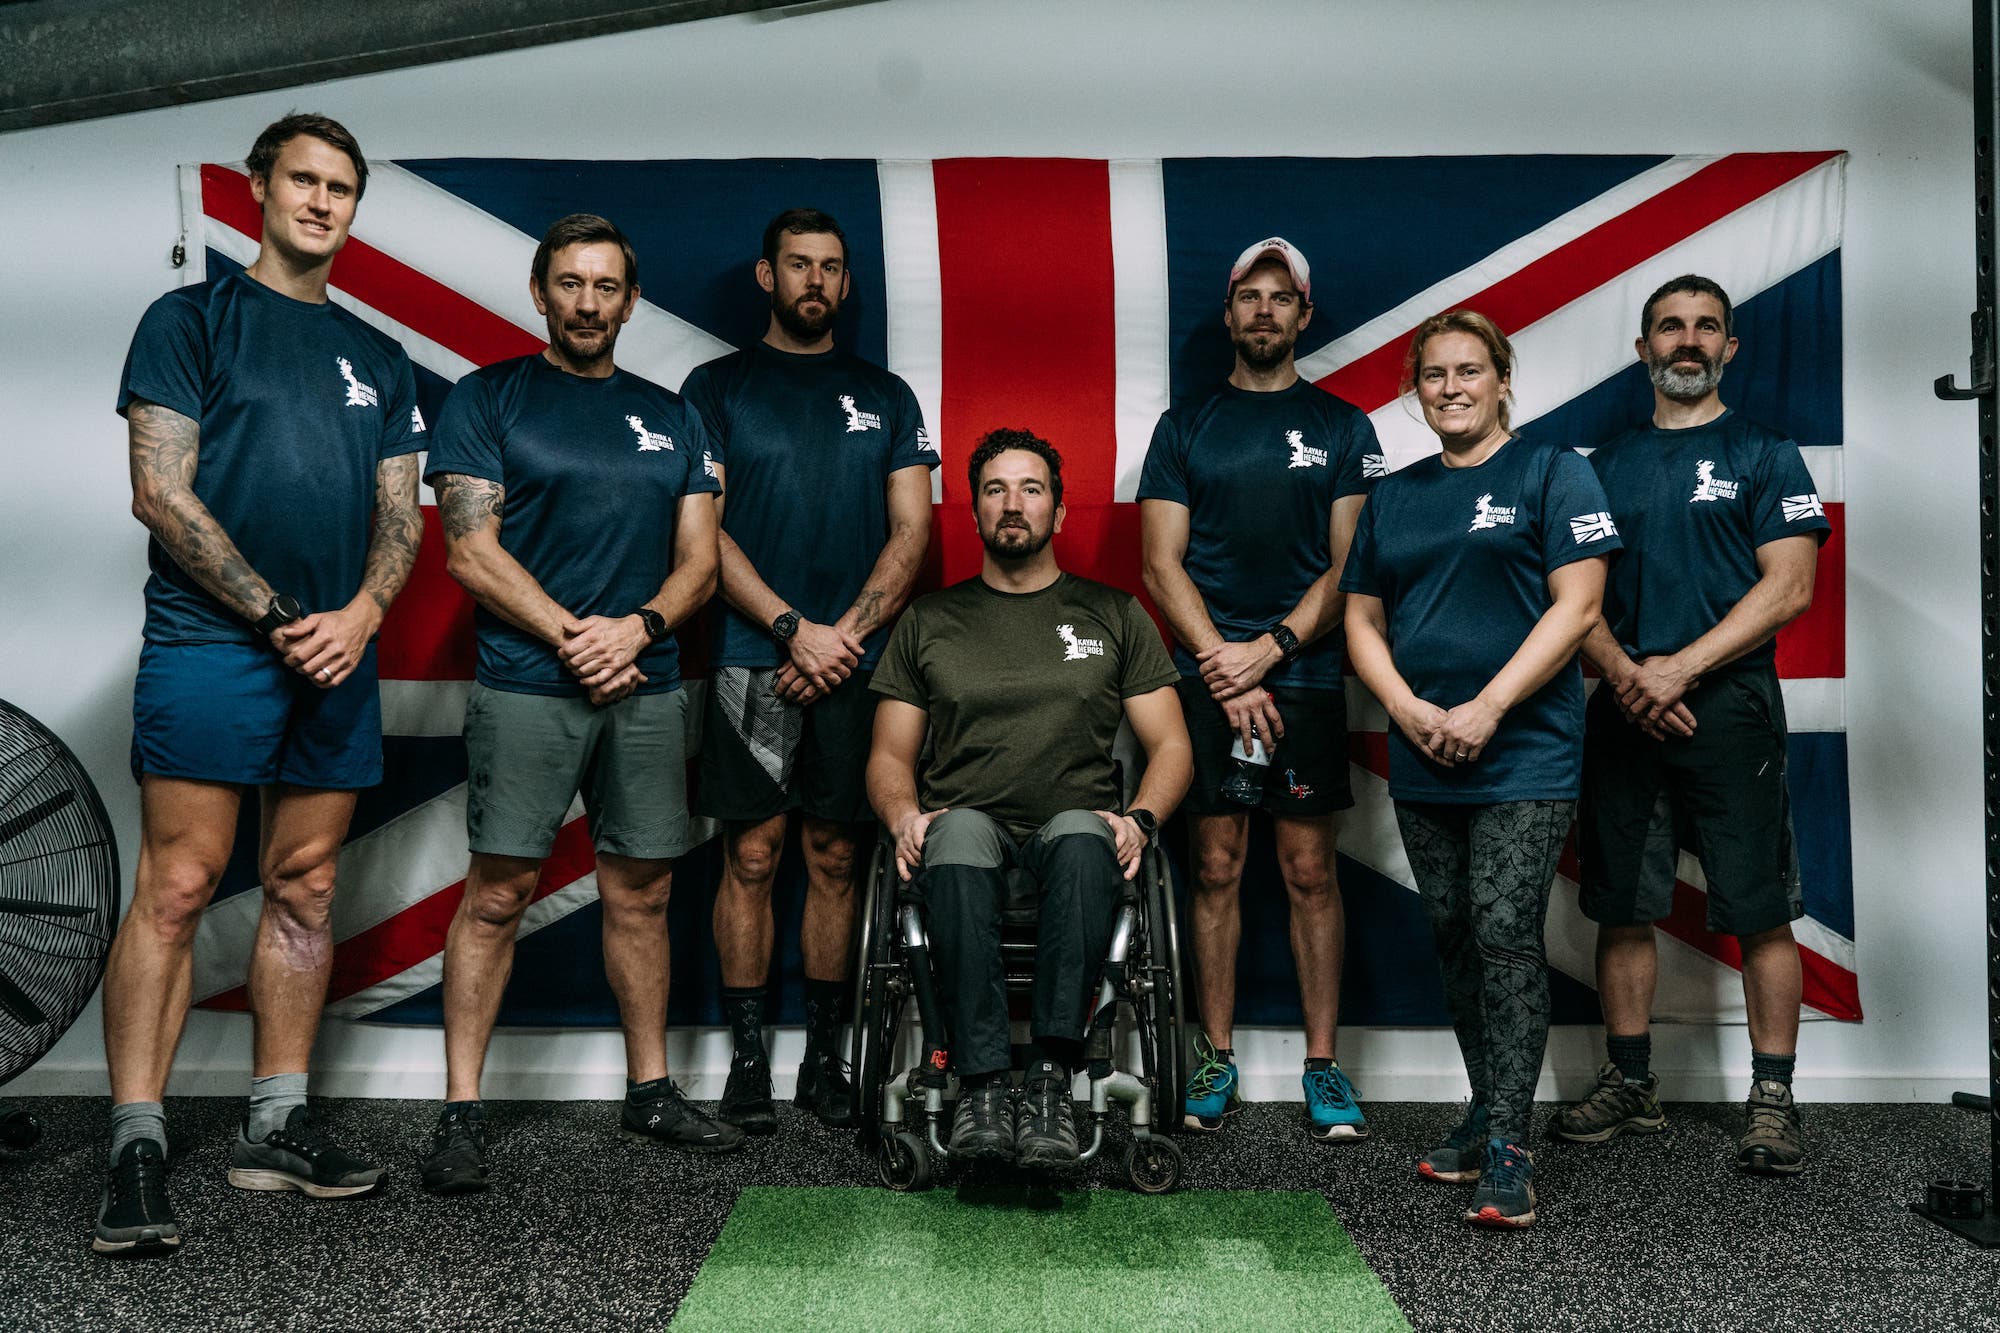 Sas star ollie ollerton mentors disabled ex military team in a new world first charity challenge1